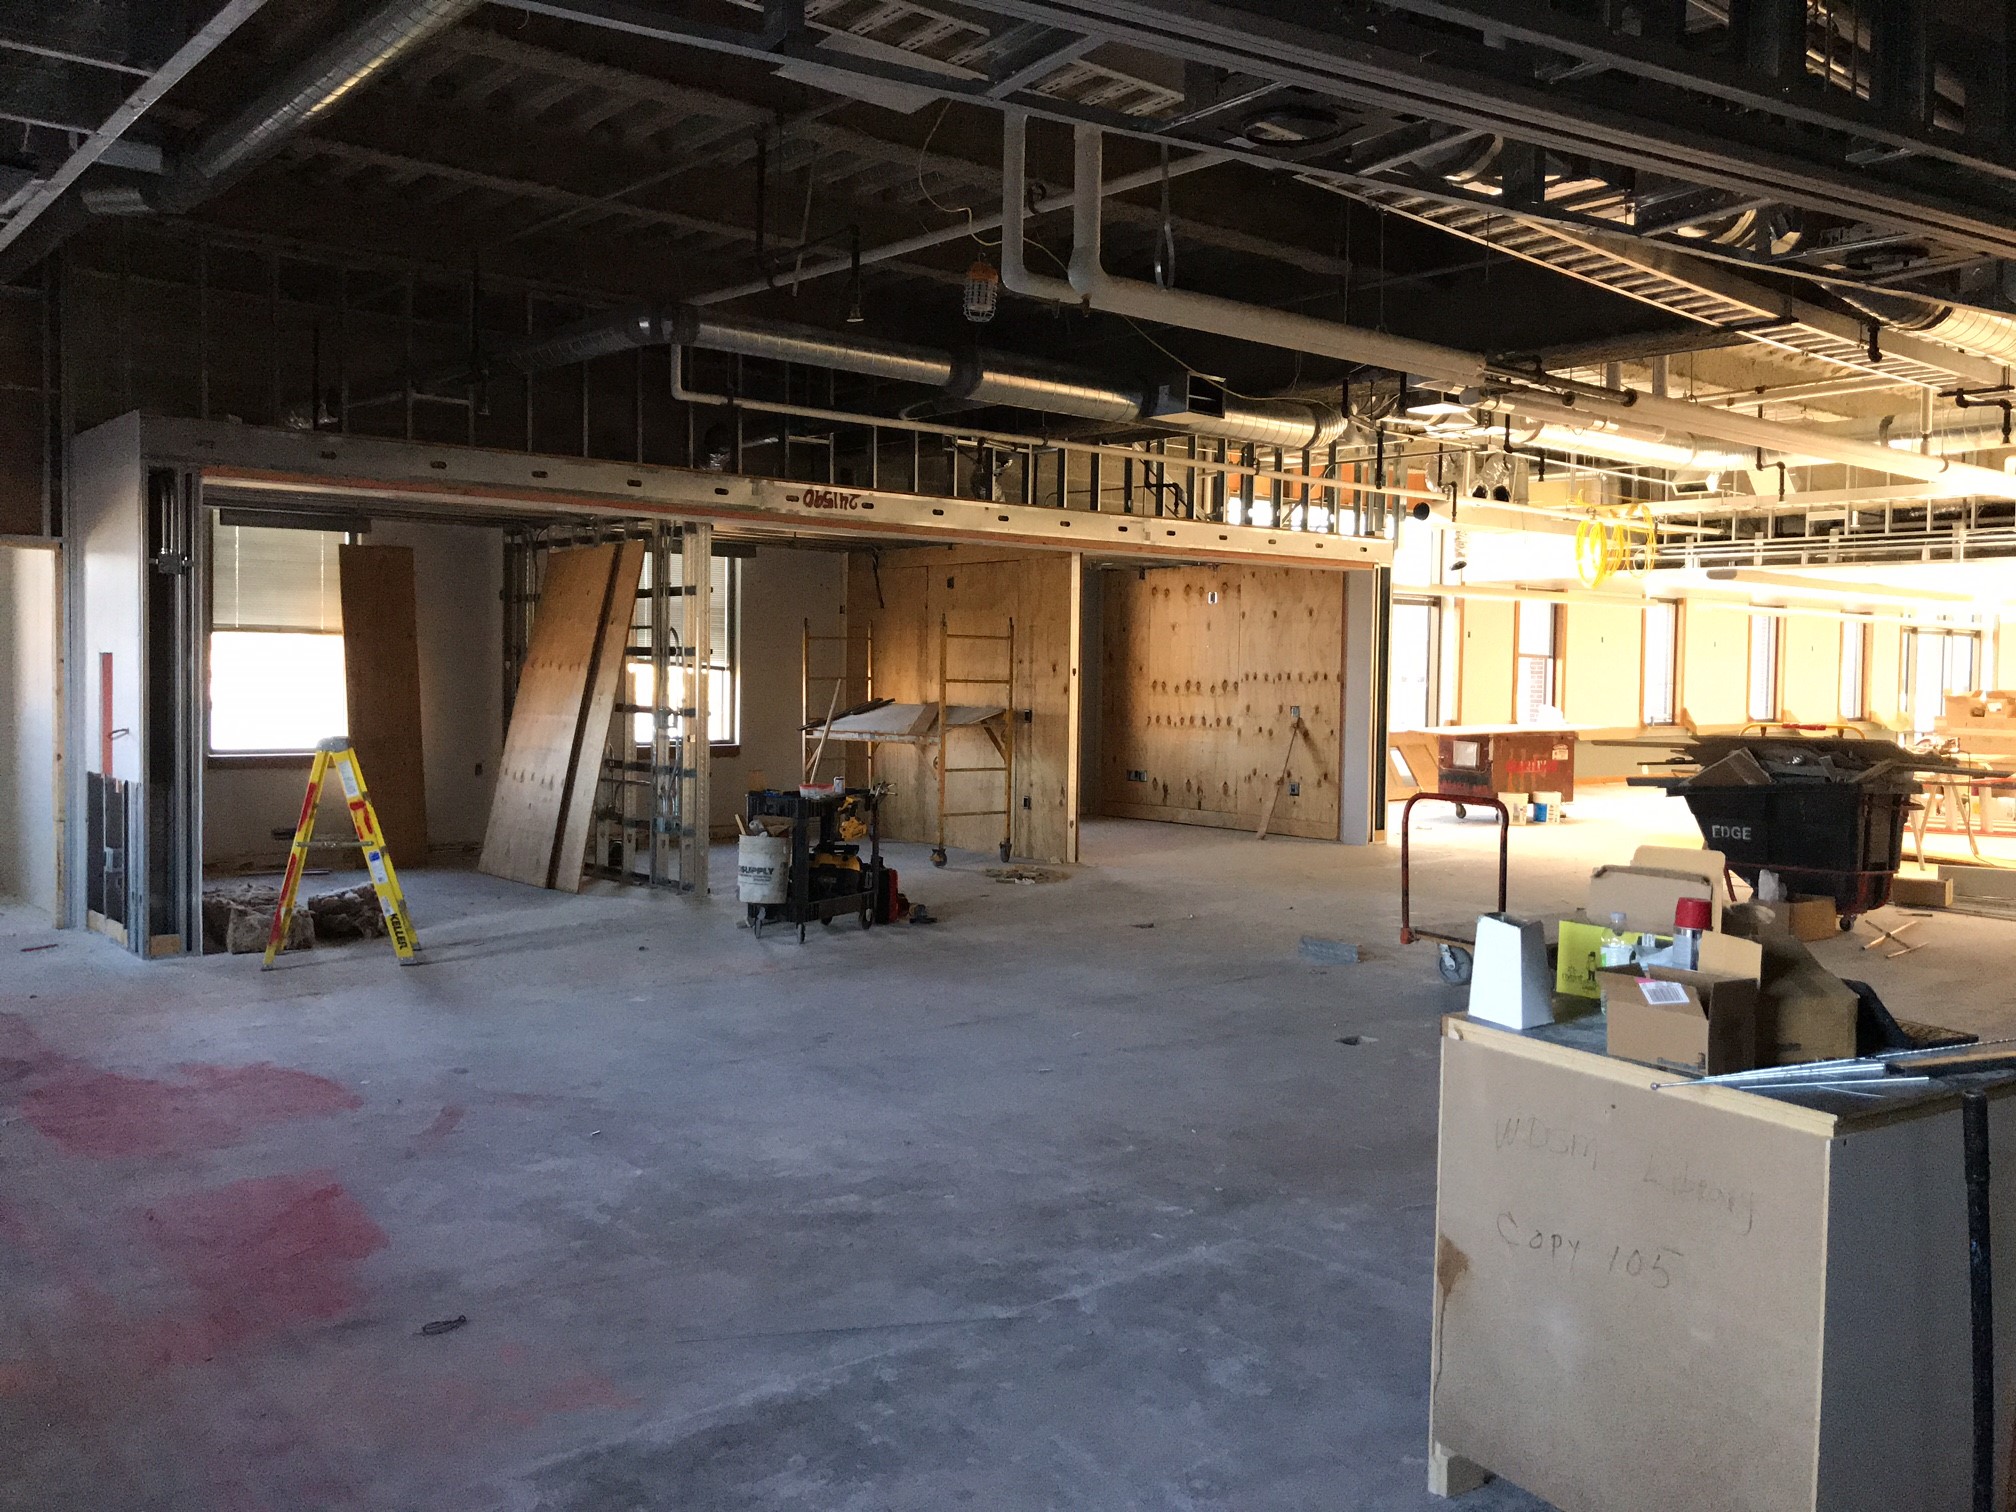 view of the teen center study rooms under construction